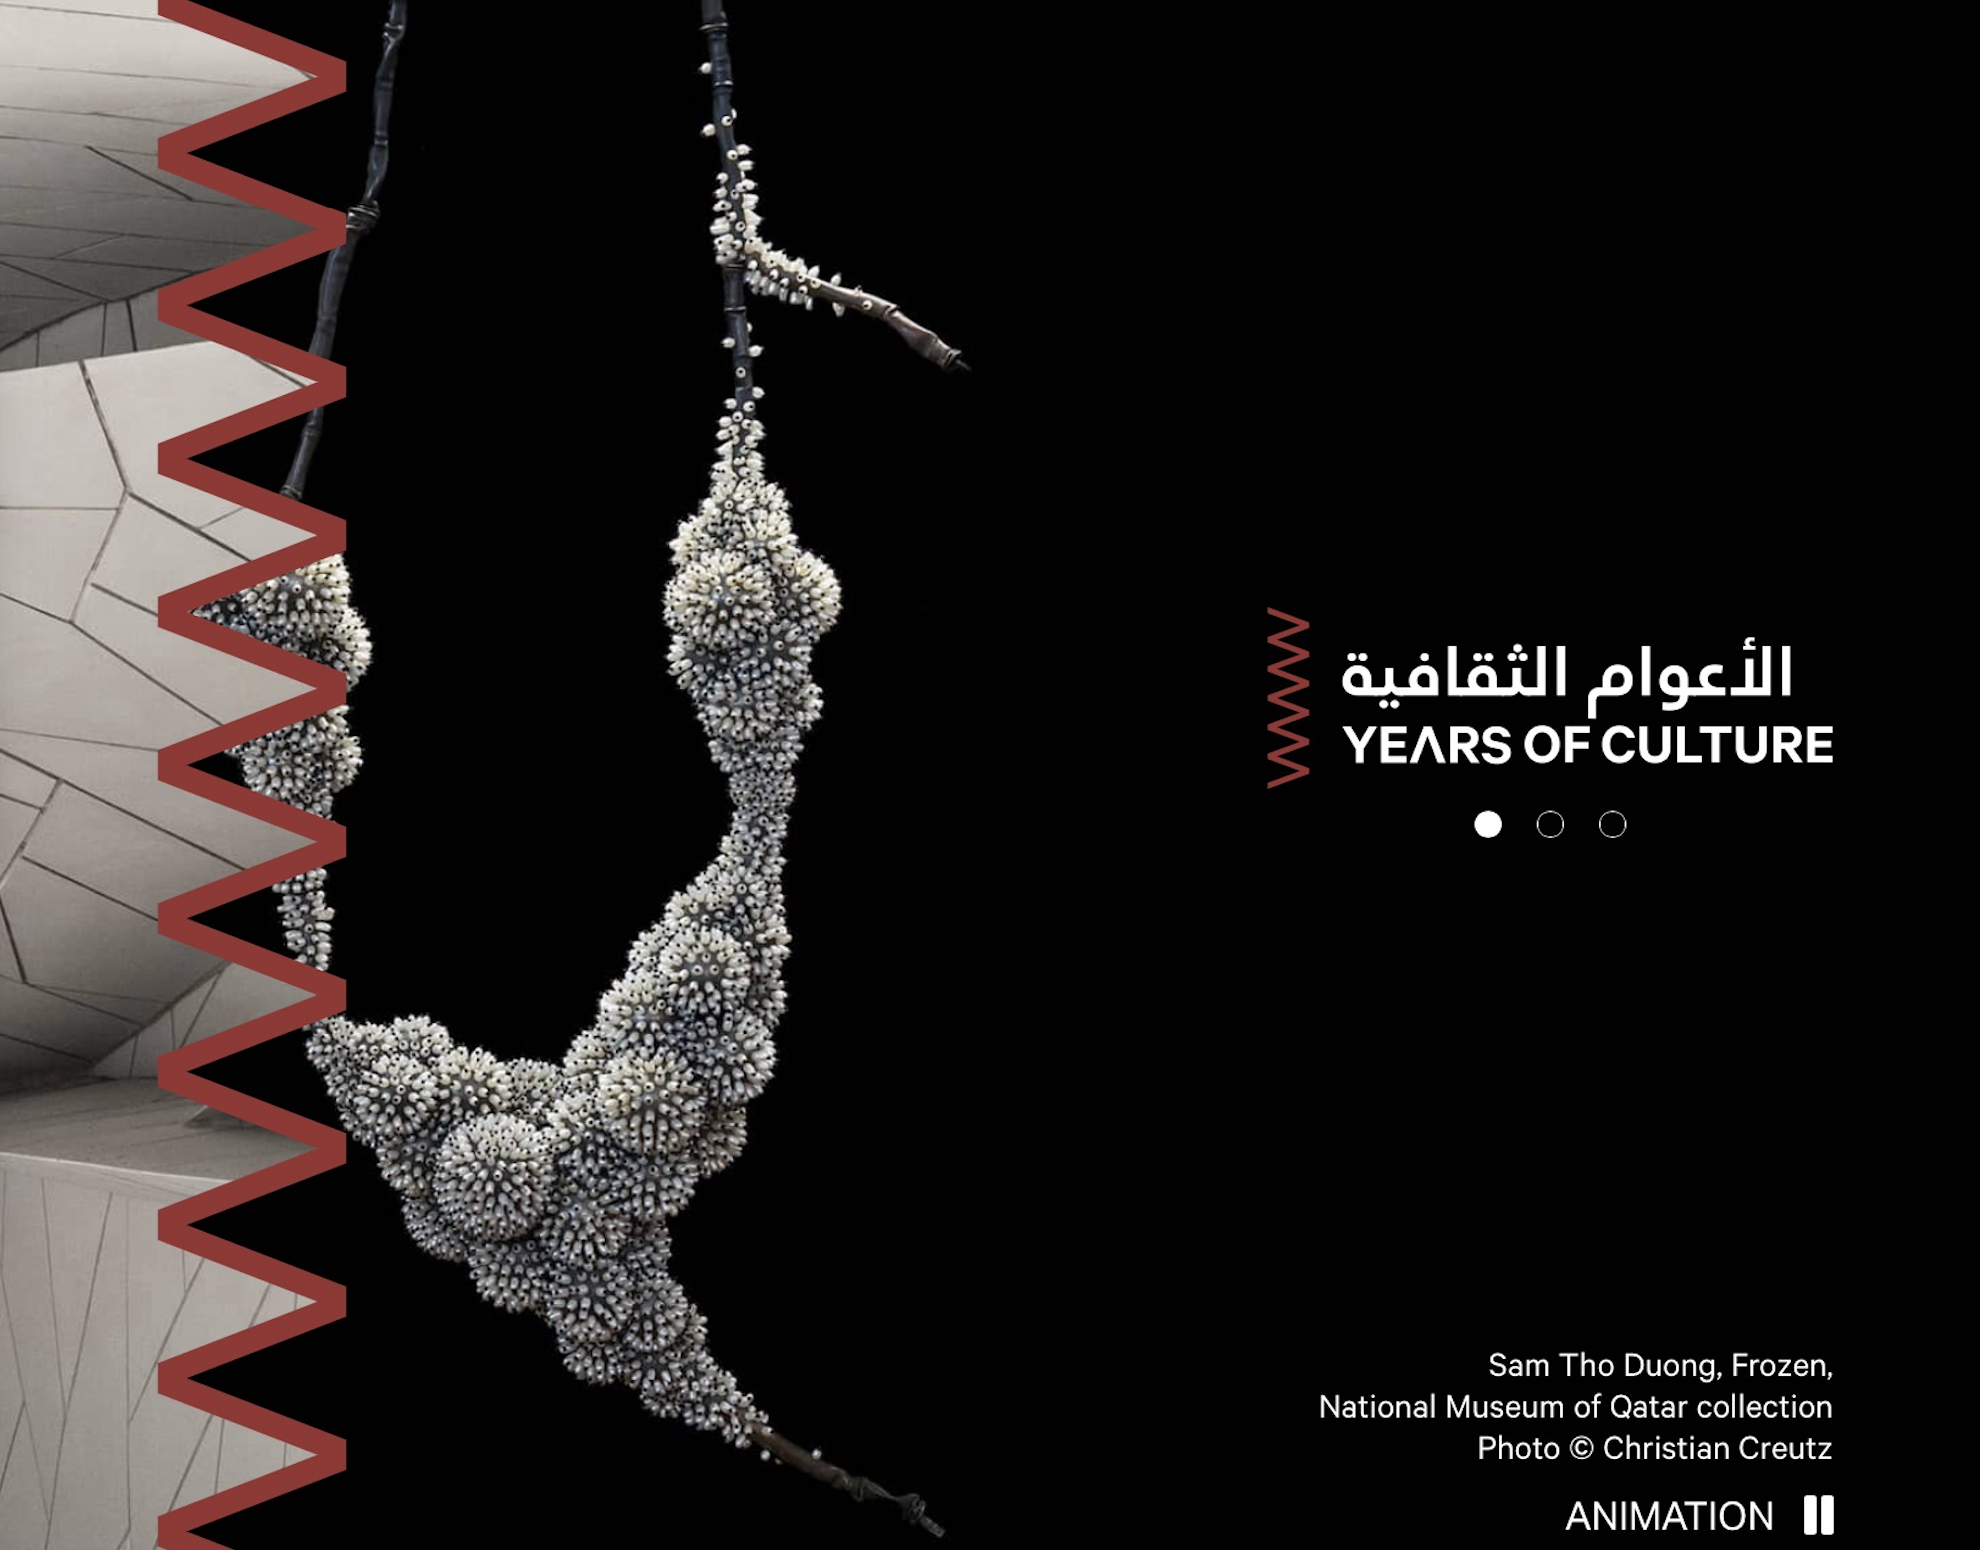 Years of Culture logo on a black background, with a contemporary pearl necklace from the National Museum of Qatar collection.